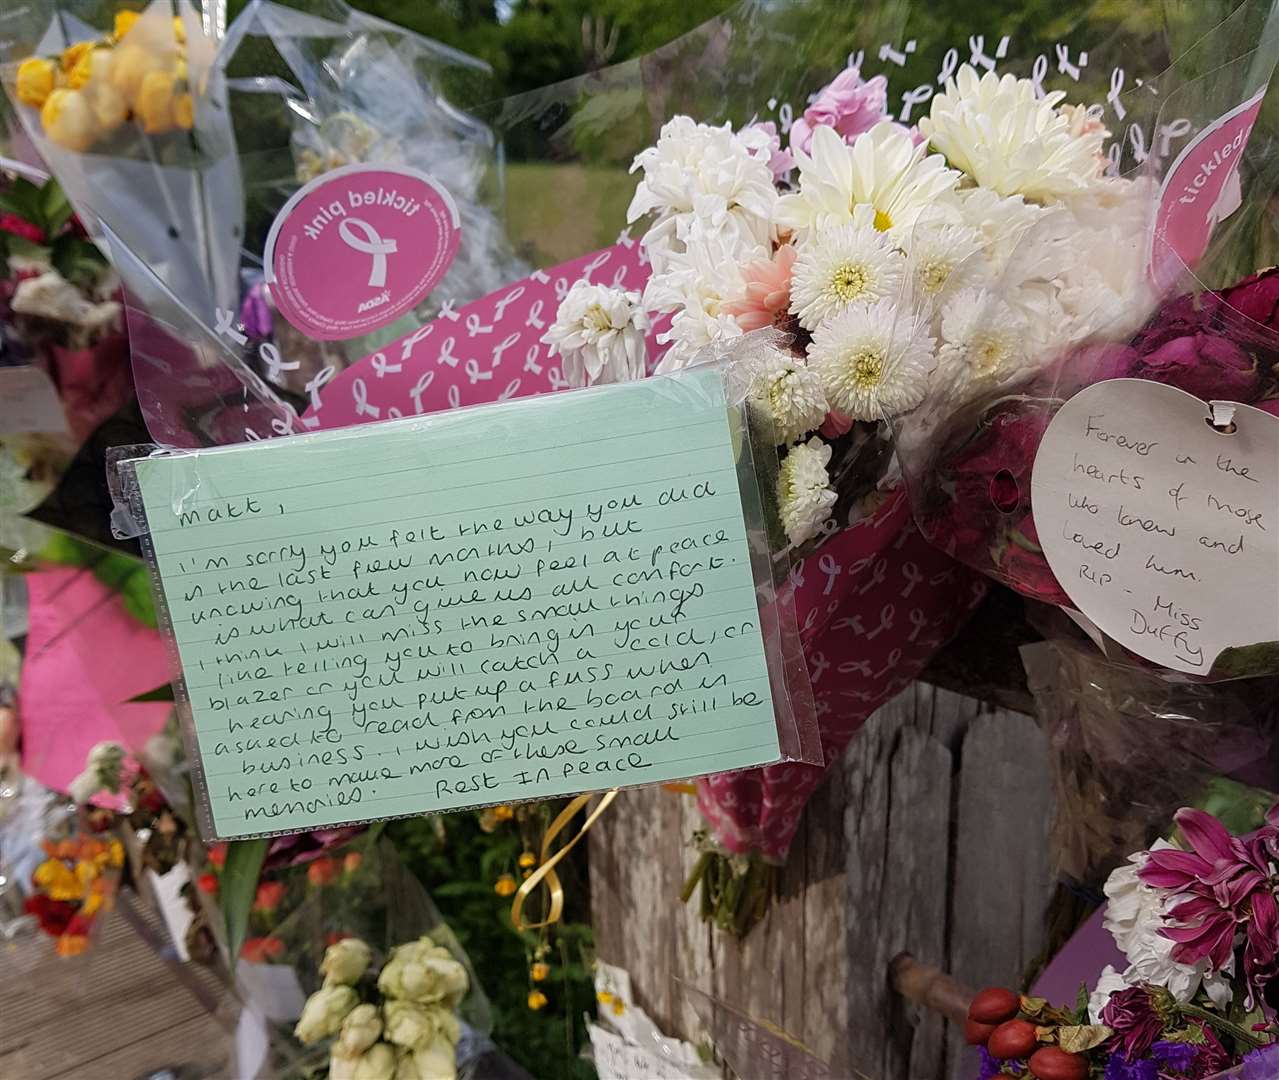 Flowers and messages at Dunorlan Park in Tunbridge Wells in memory of Matthew